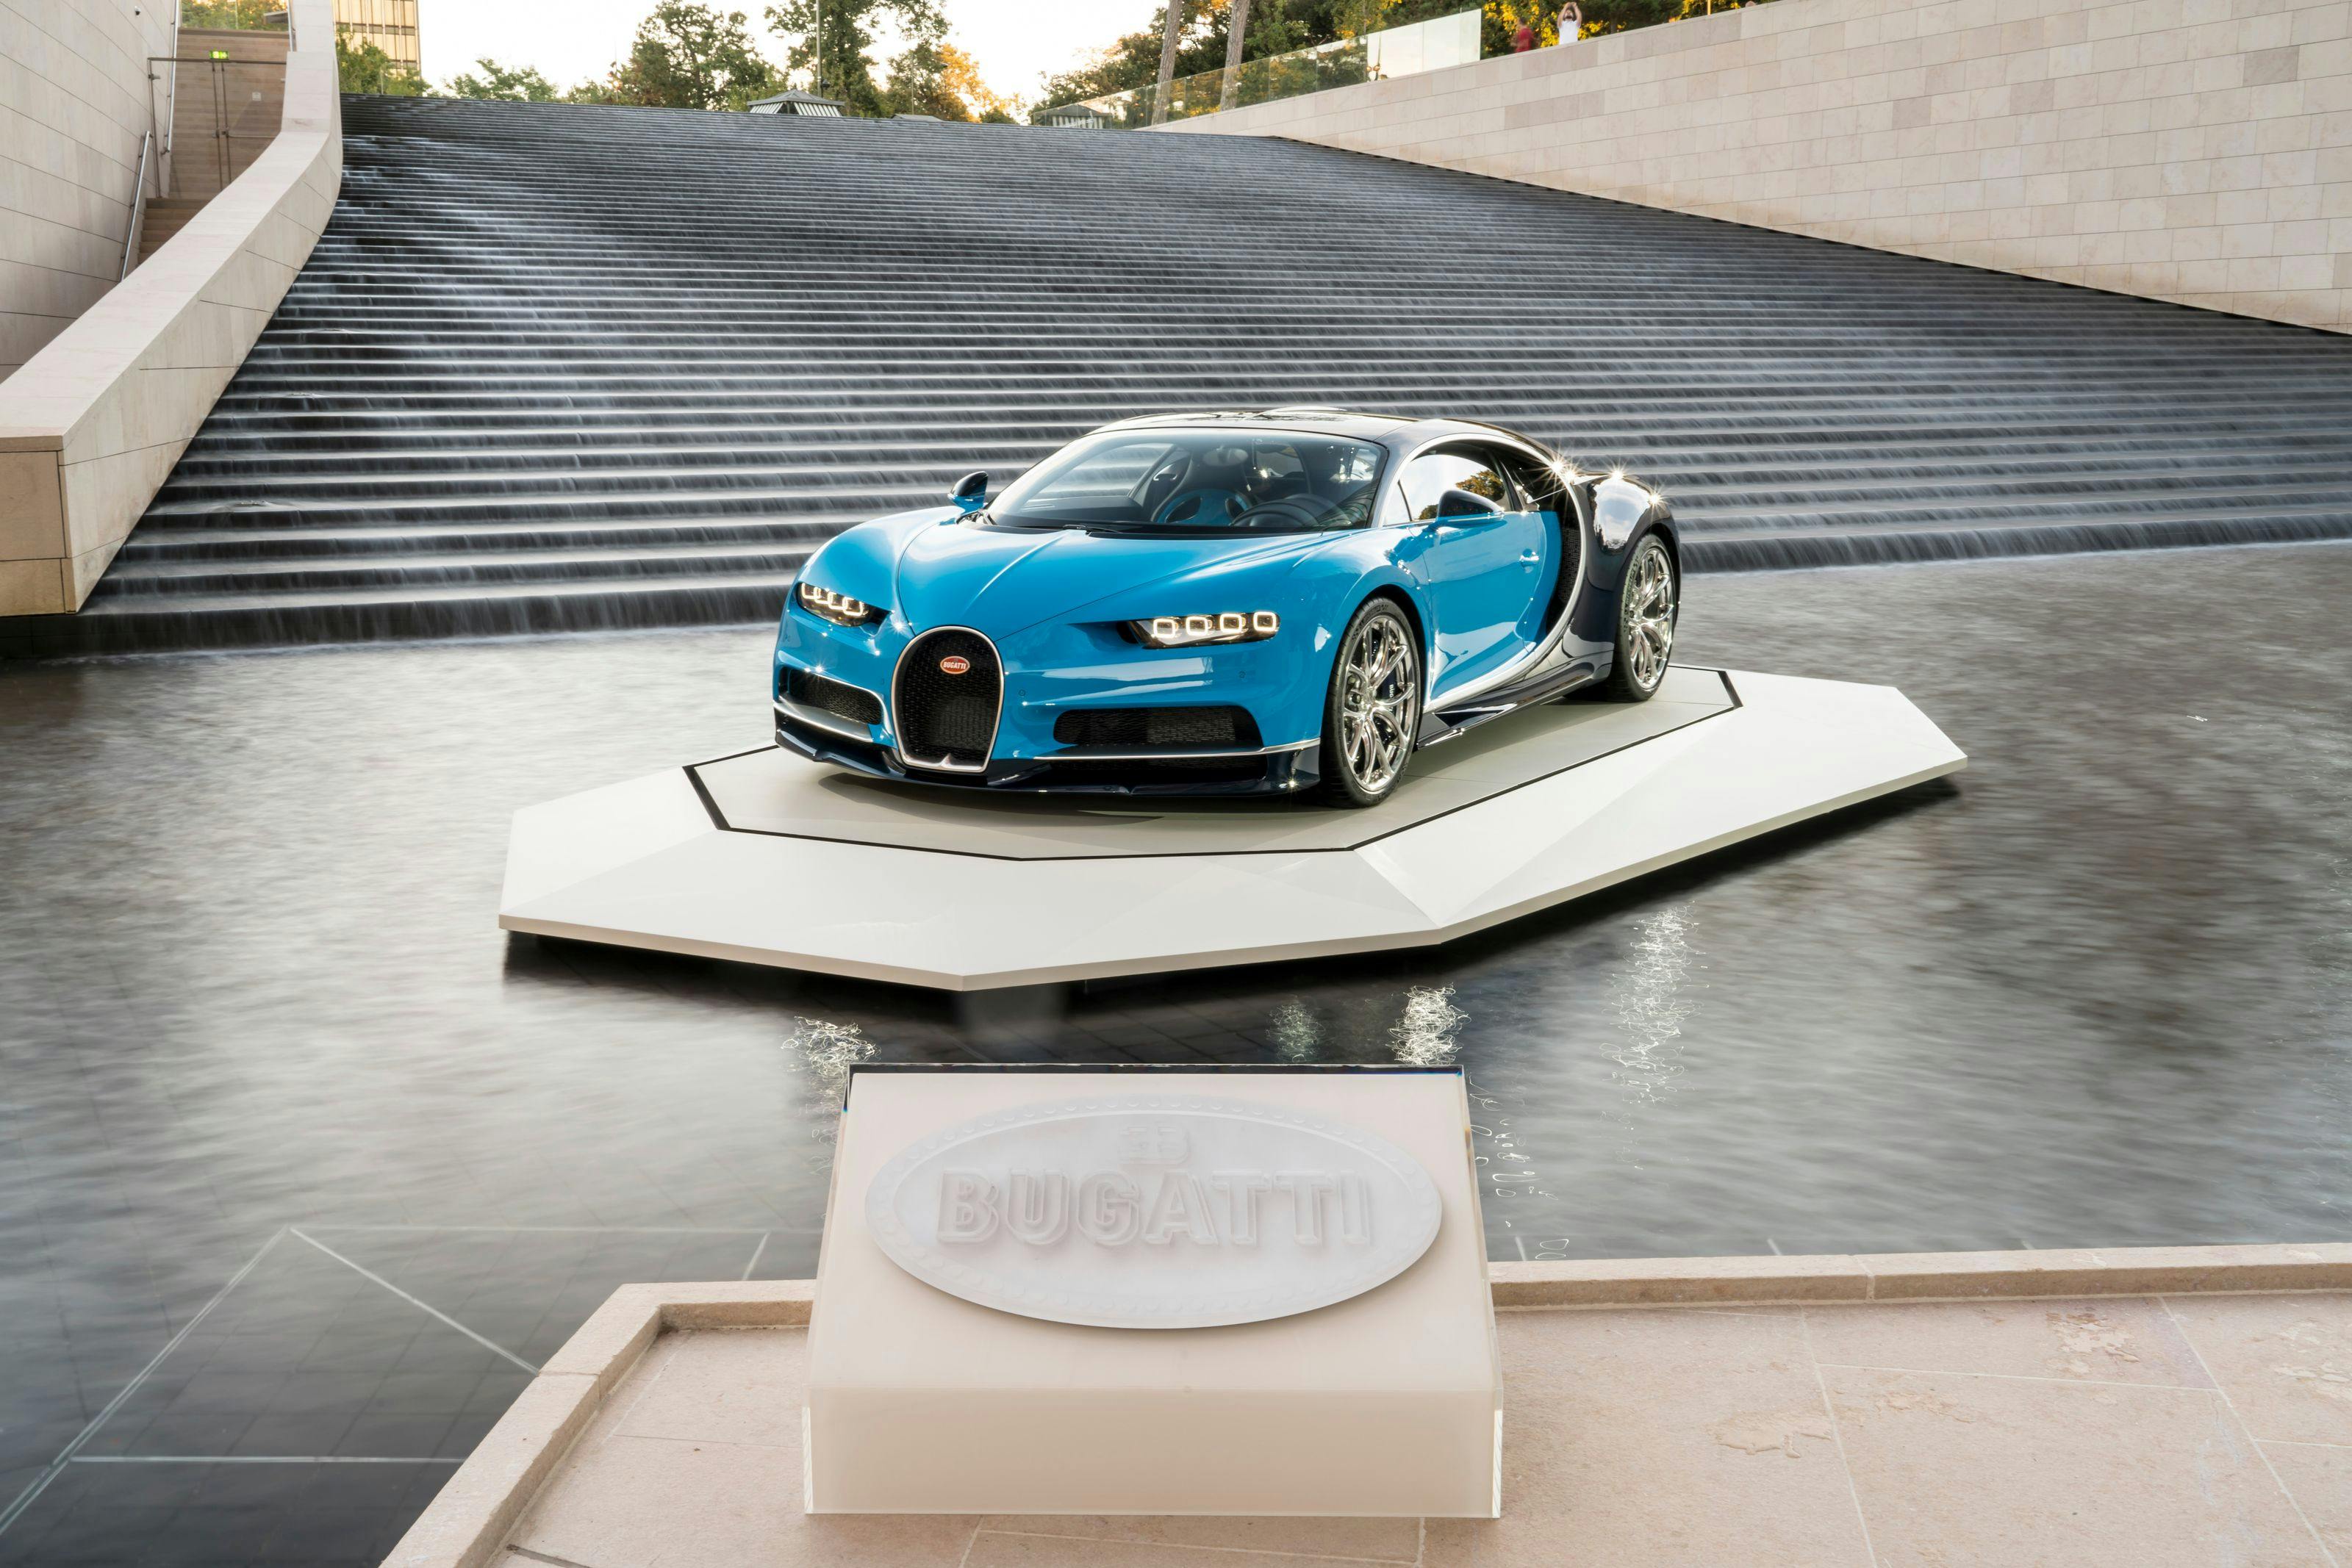 Bugatti Chiron on a flying visit to the Fondation Louis Vuitton